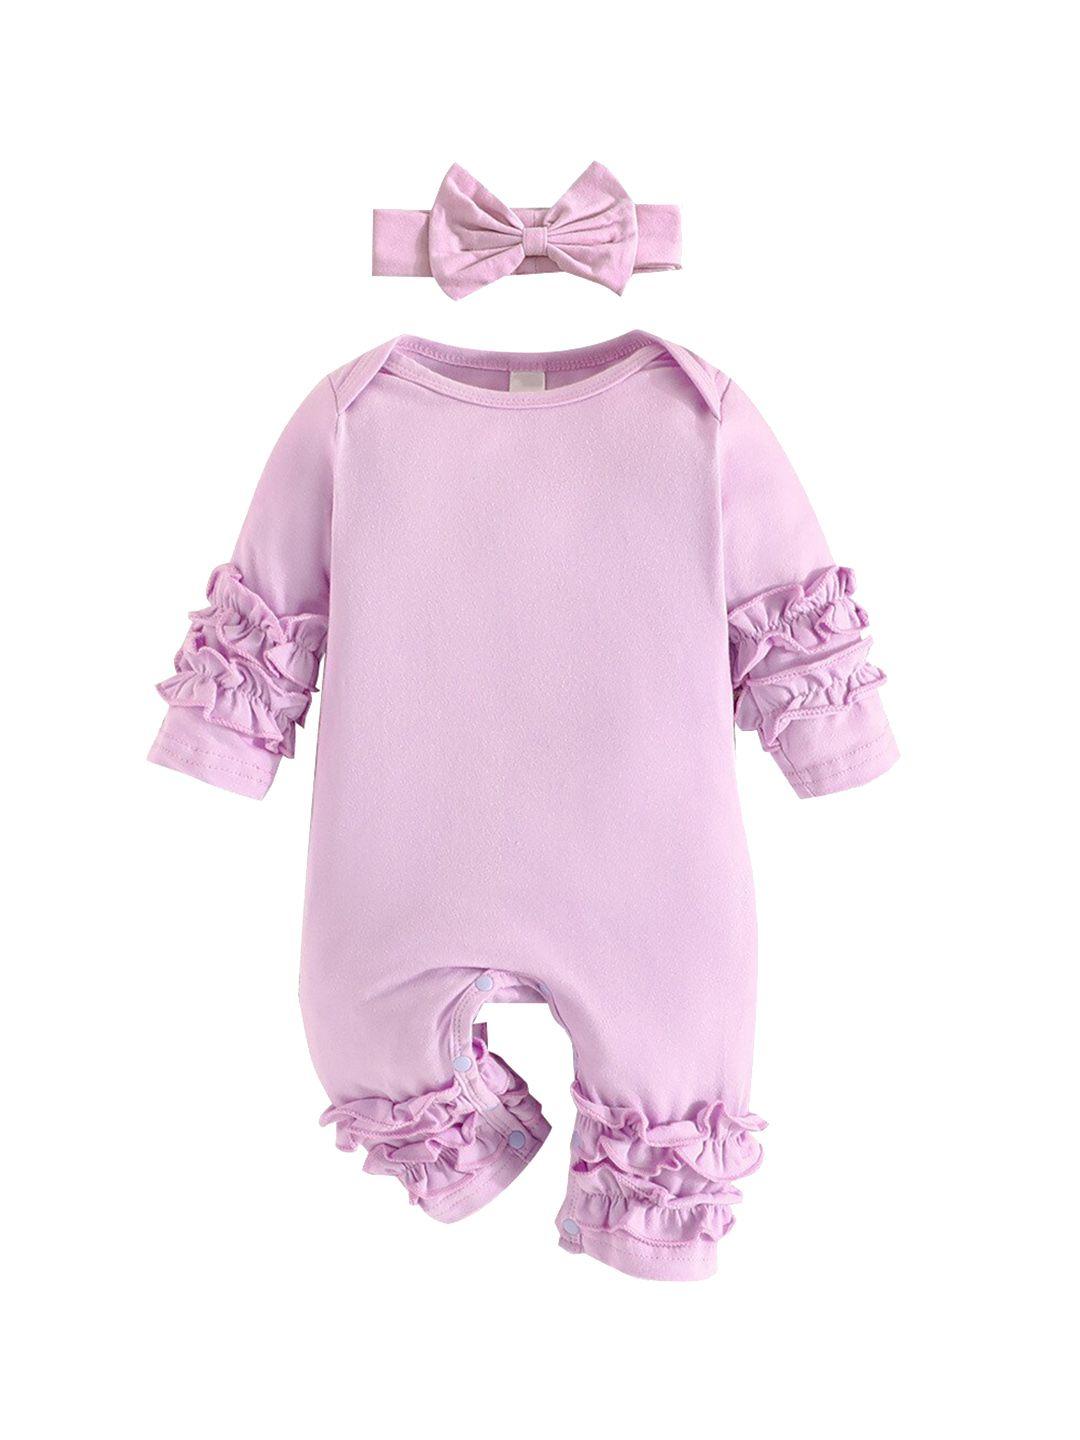 stylecast infant girls purple cotton rompers with bow